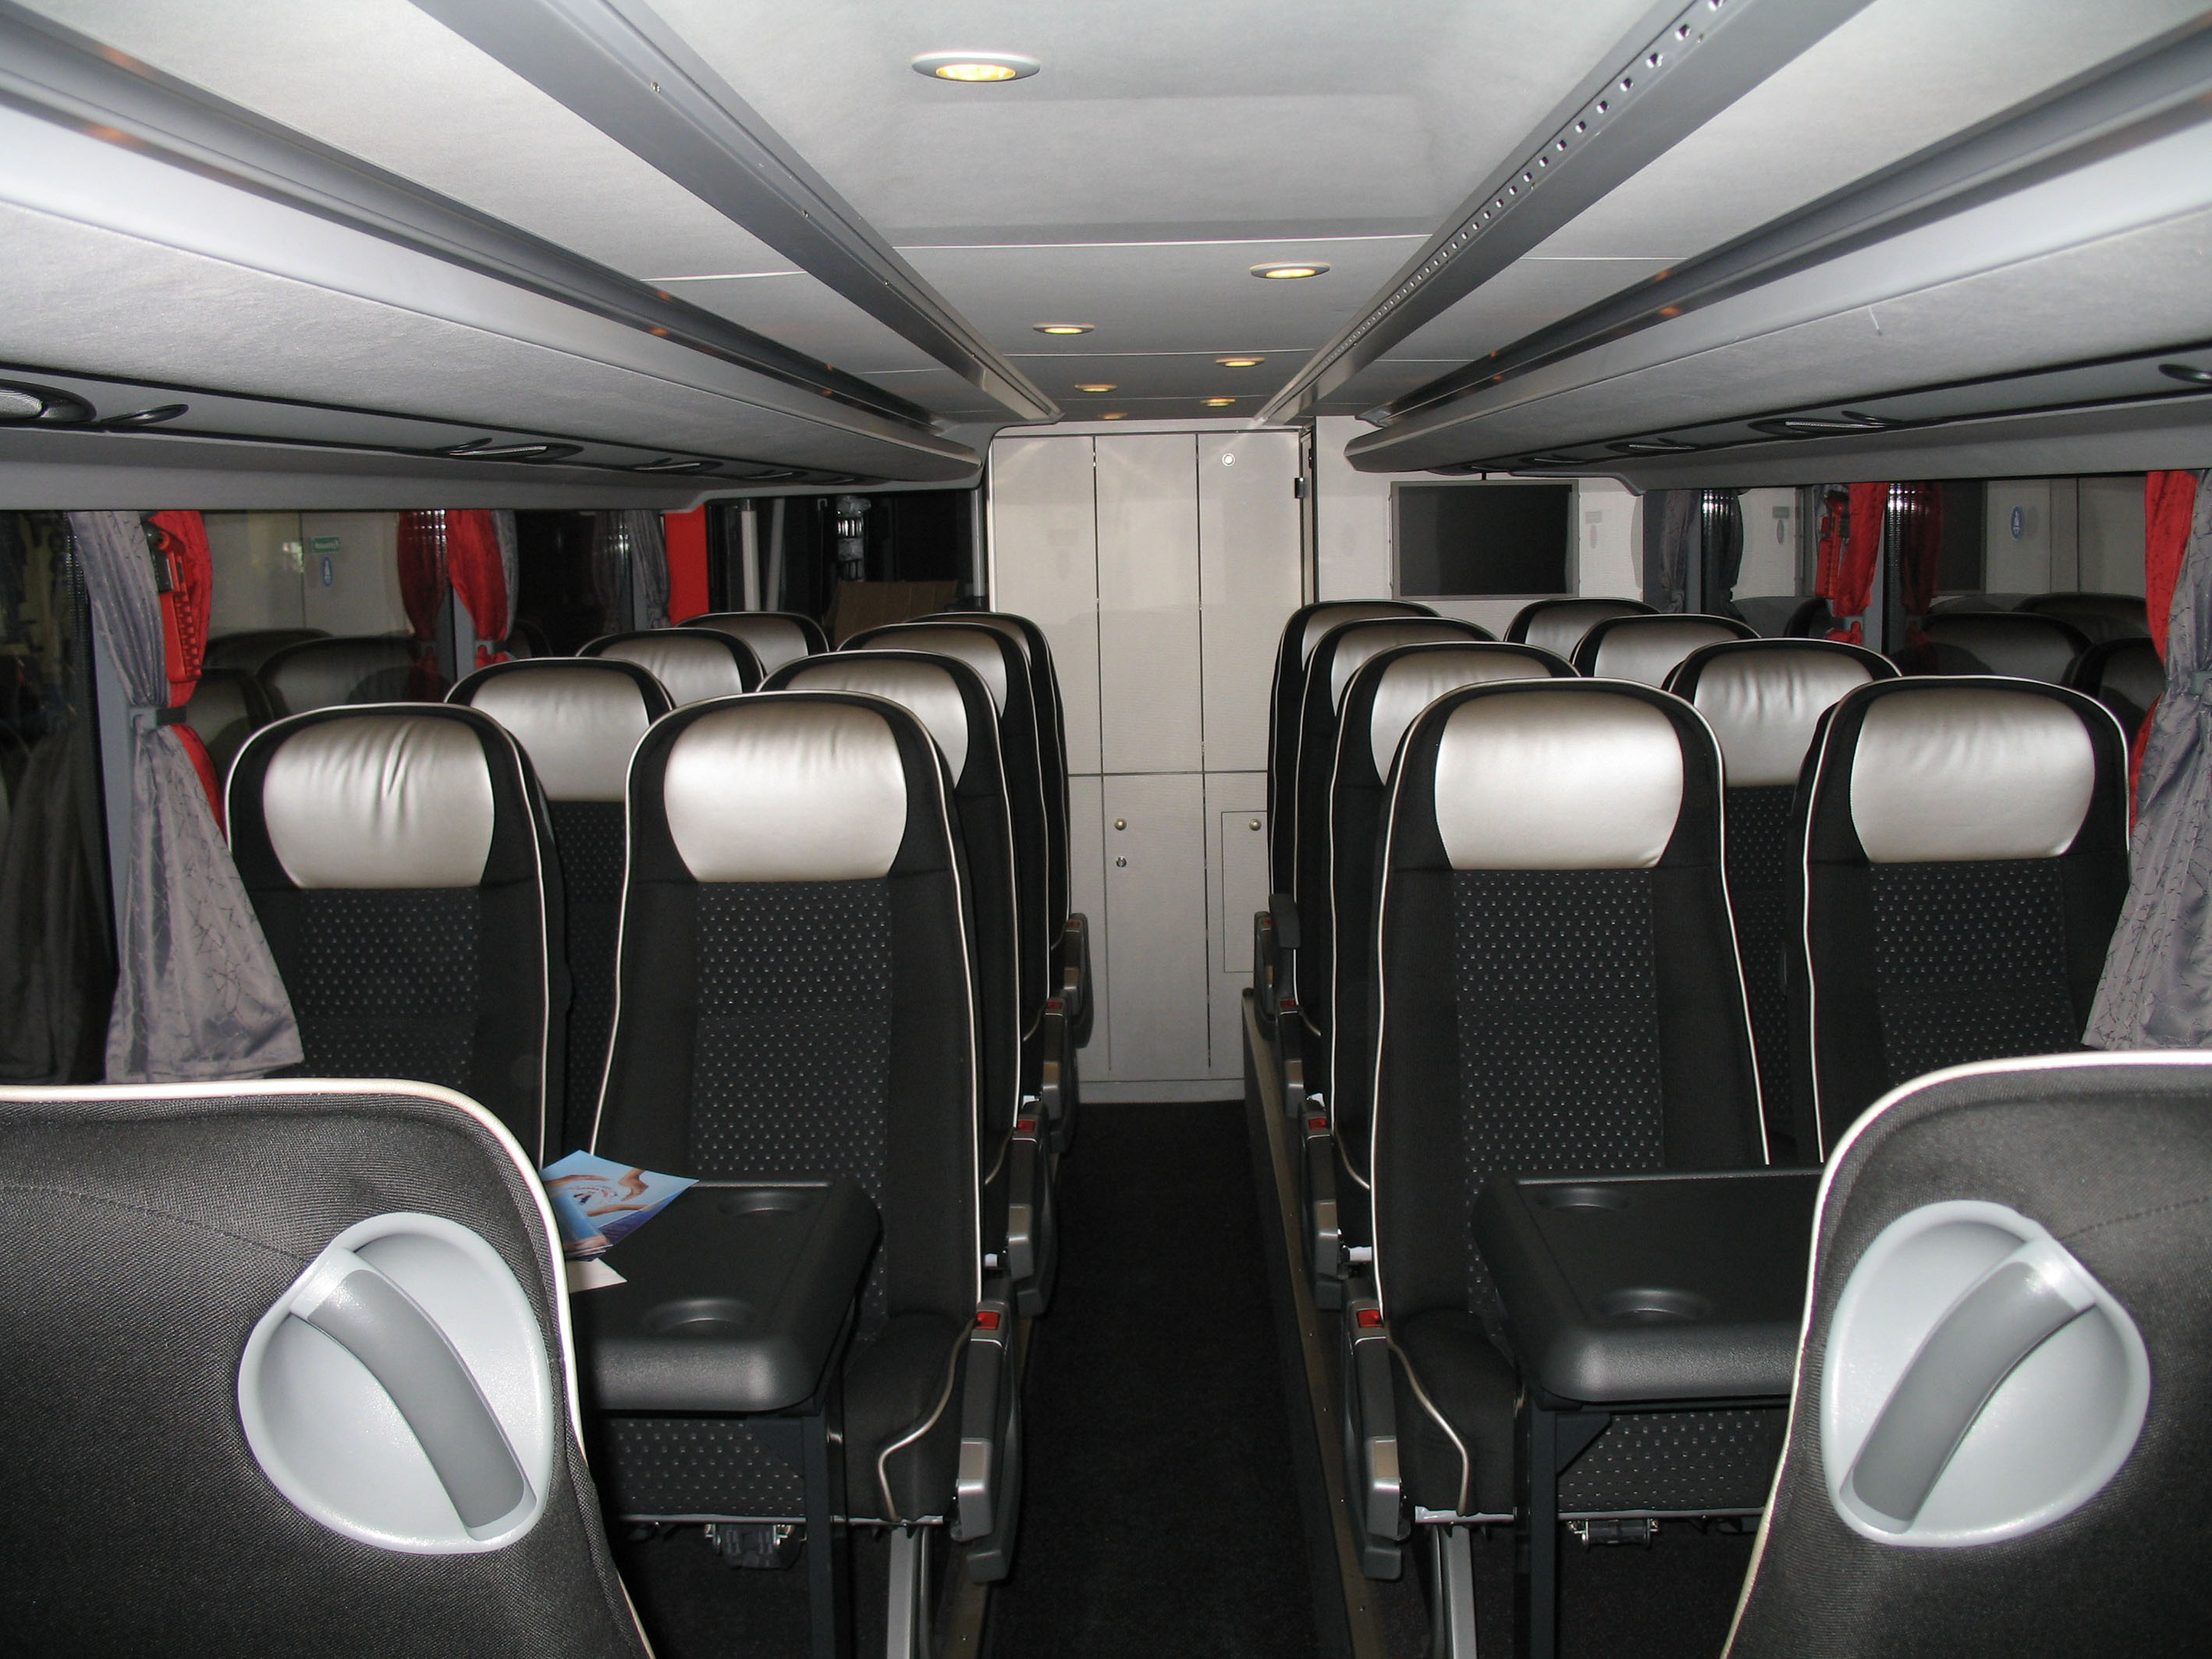 File:Setra S 431 DT - interior rear.jpg - Wikimedia Commons